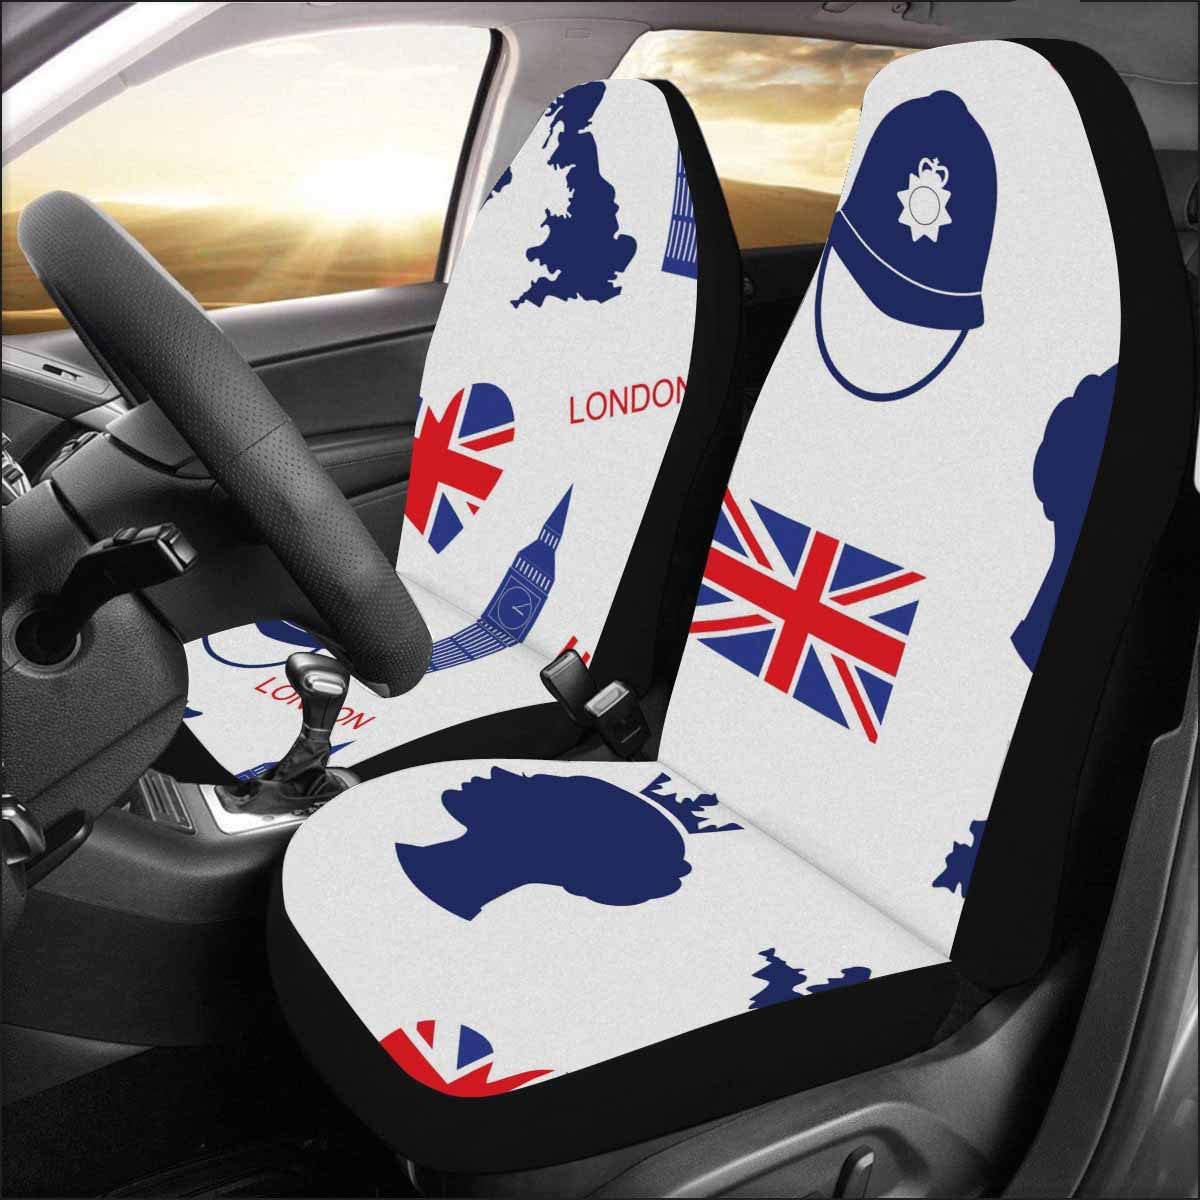 ZHANZZK Set of 2 Car Seat Covers London, Union Jack Flag Universal Auto Front Seats Protector Fits for Car,SUV Sedan,Truck - image 2 of 4